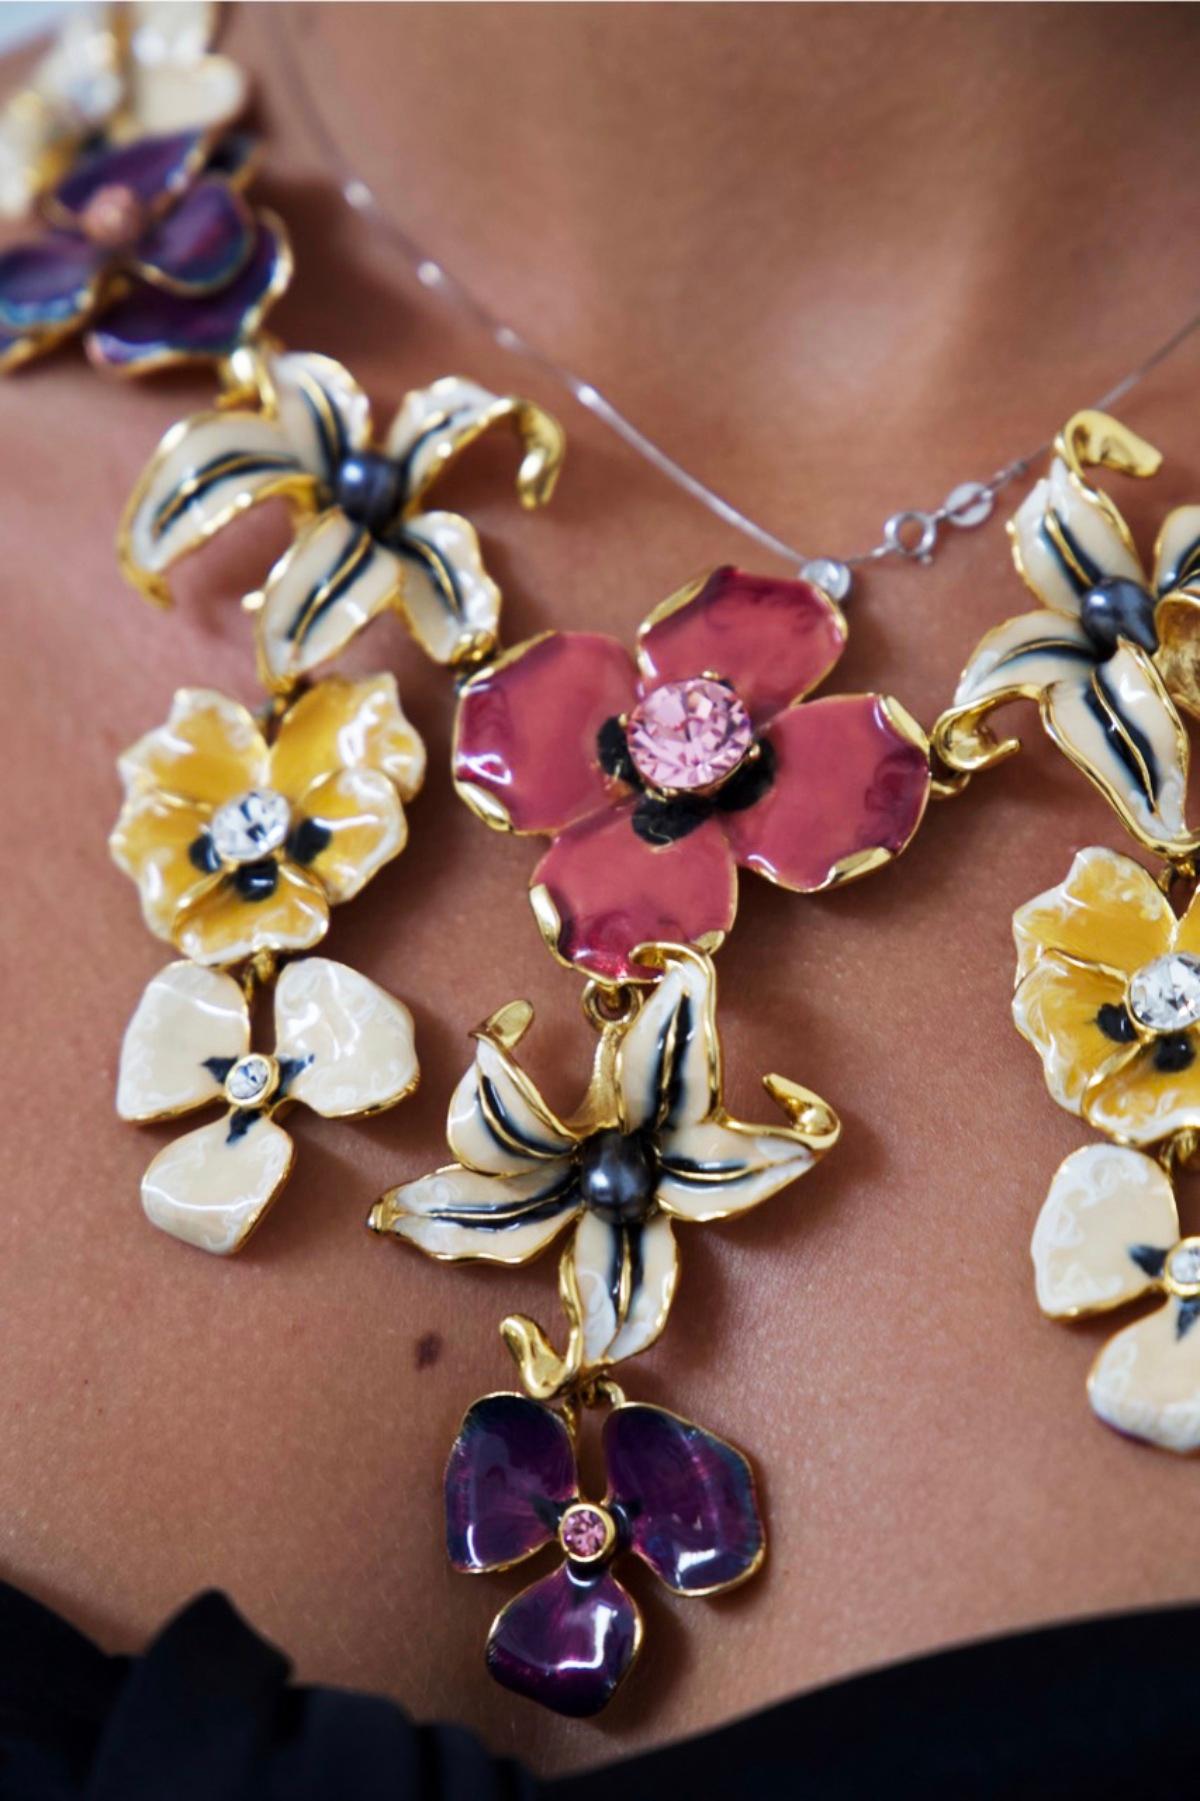 Lovely floral necklace designed by Kenneth Lane in the 1990s, fine French manufacture.
The necklace spans 10 horizontal rows of colorful little flowers in shades of pink, purple, white and yellow.
The necklace fastens behind the neck thanks to the